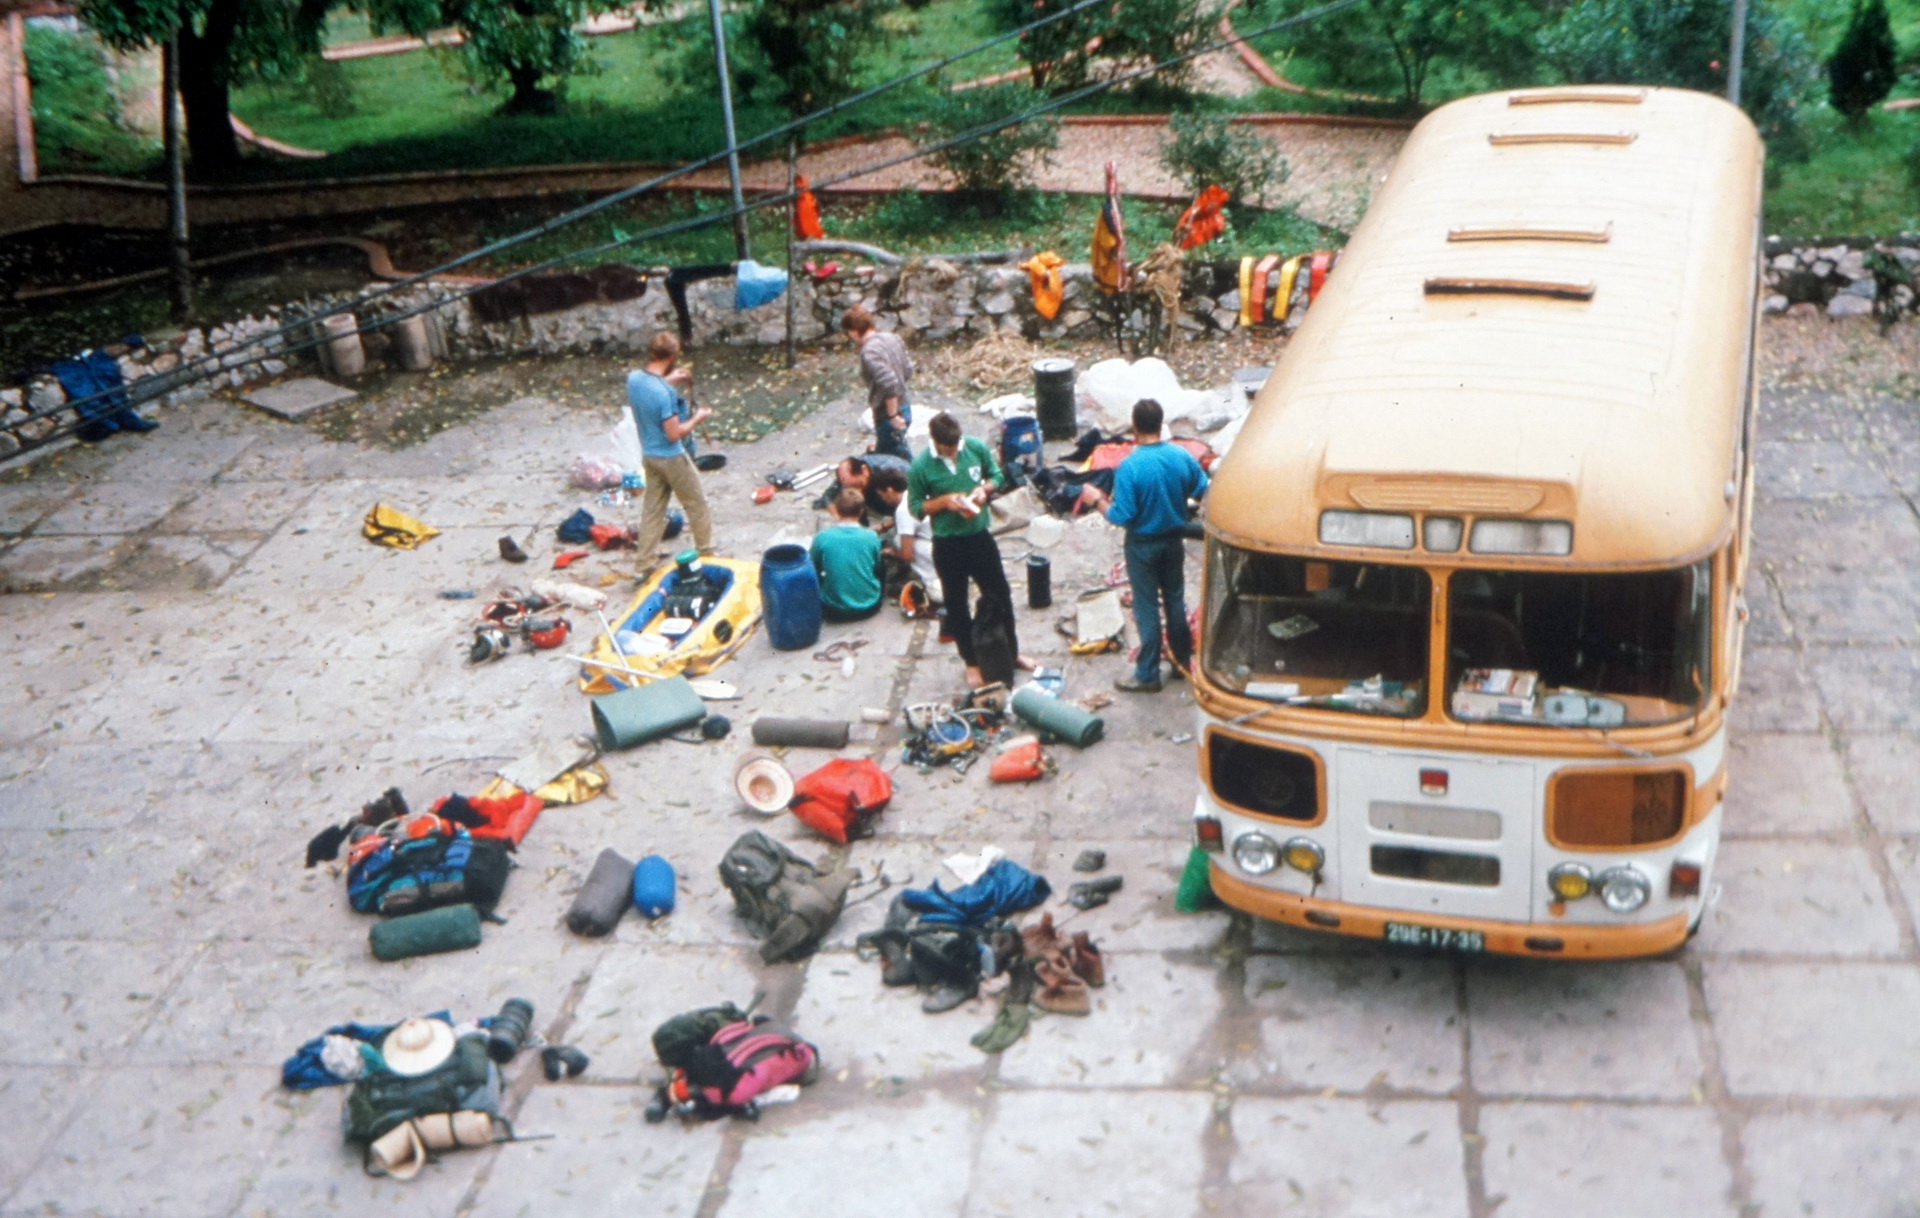 Equipment and gears of Howard Limbert’s team before their first-ever expedition in Phong Nha Town, Quang Binh Province, Vietnam are seen in this supplied photo taken in 1990.